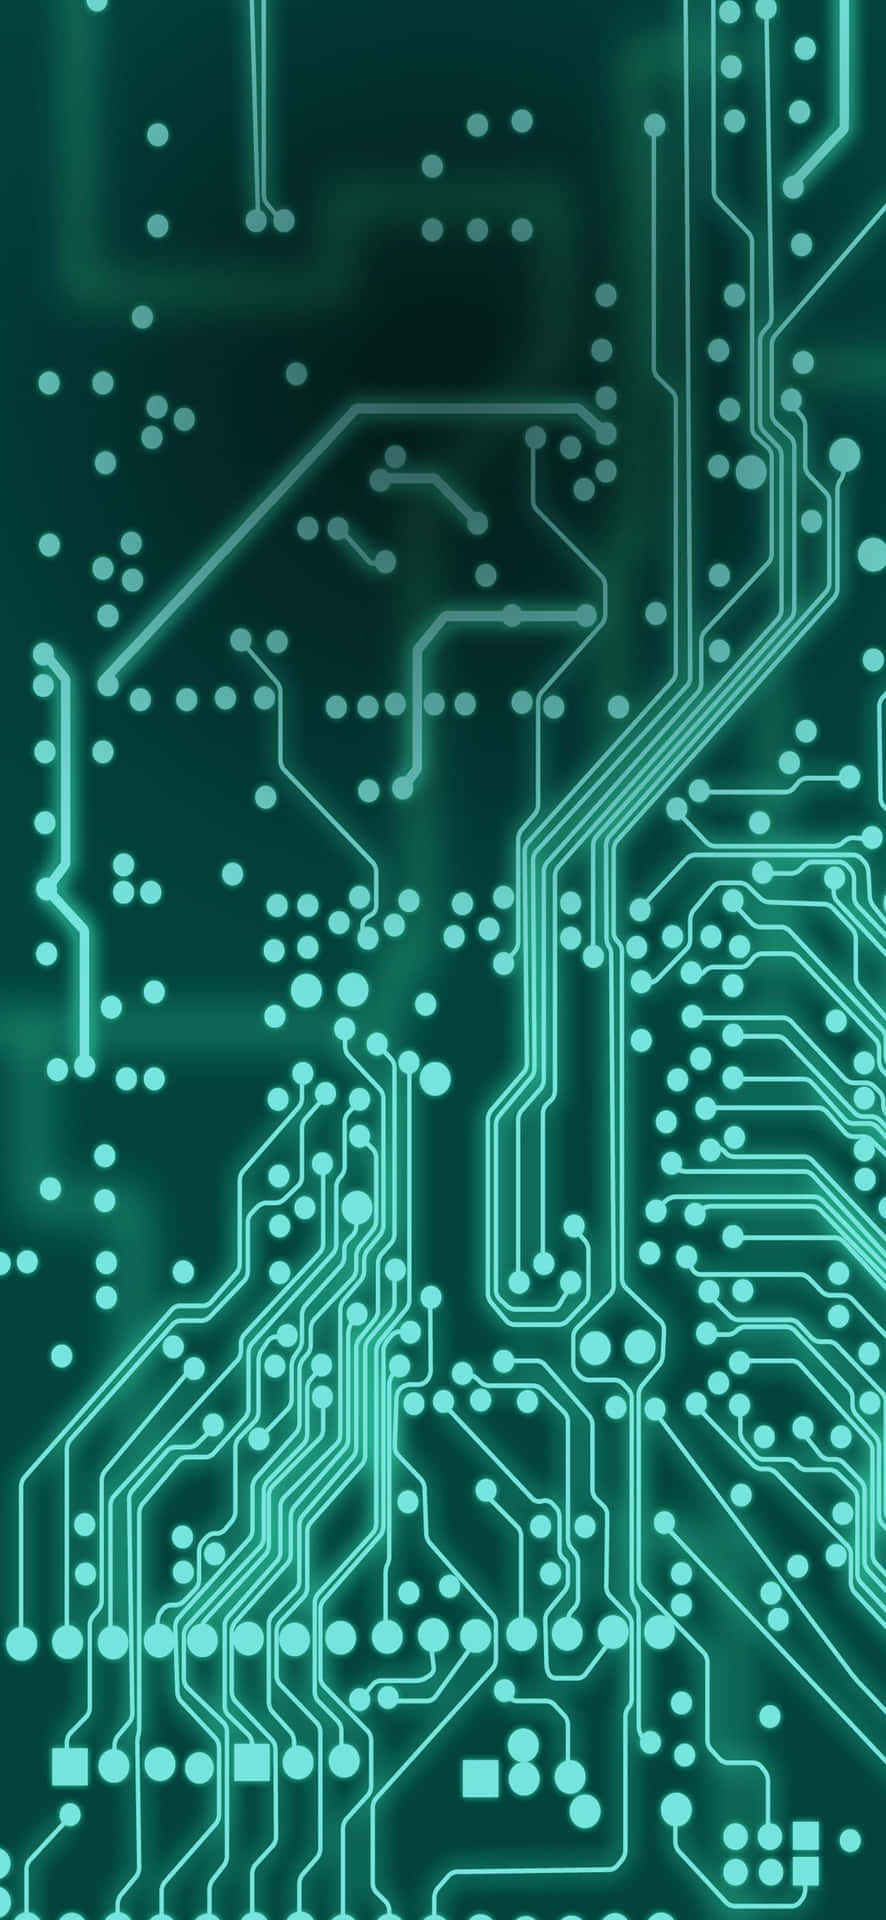 A Green Circuit Board Background With Many Circuits